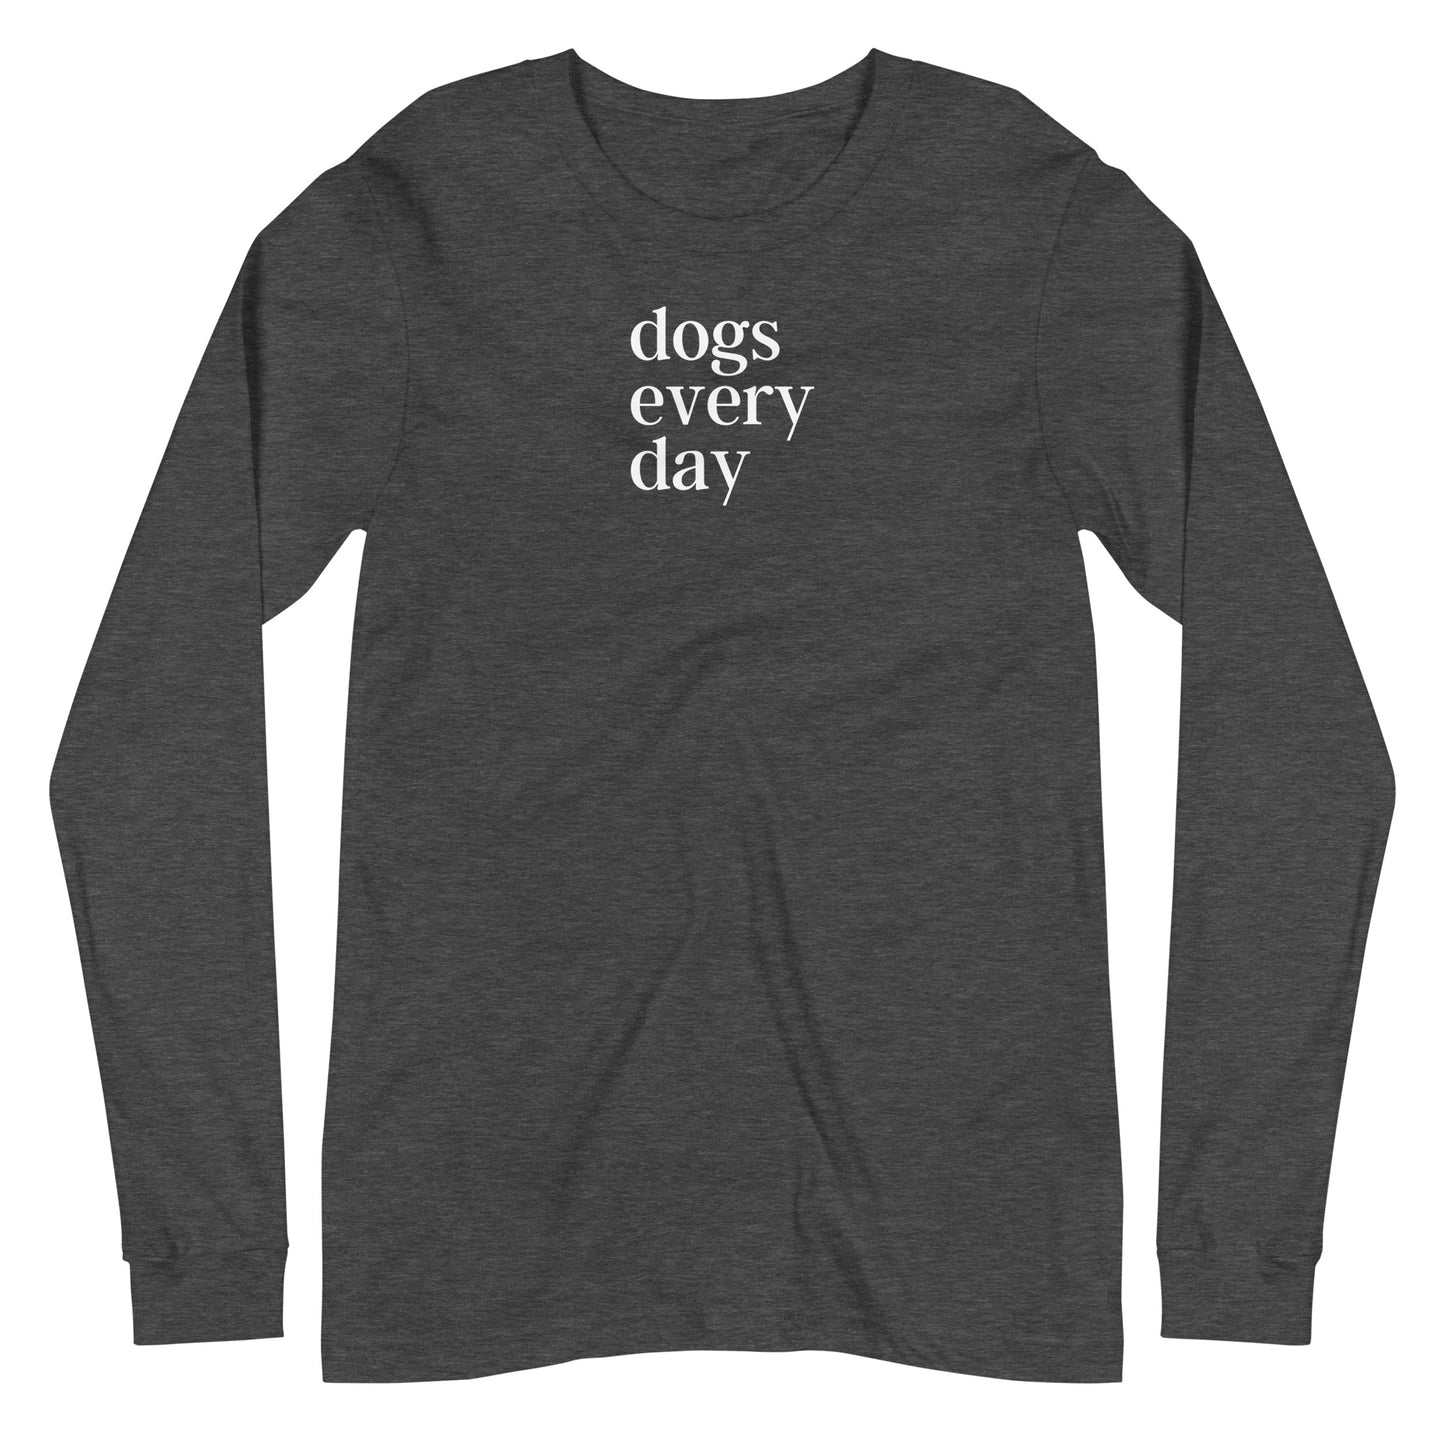 Dogs Every Day Long-sleeved T-shirt